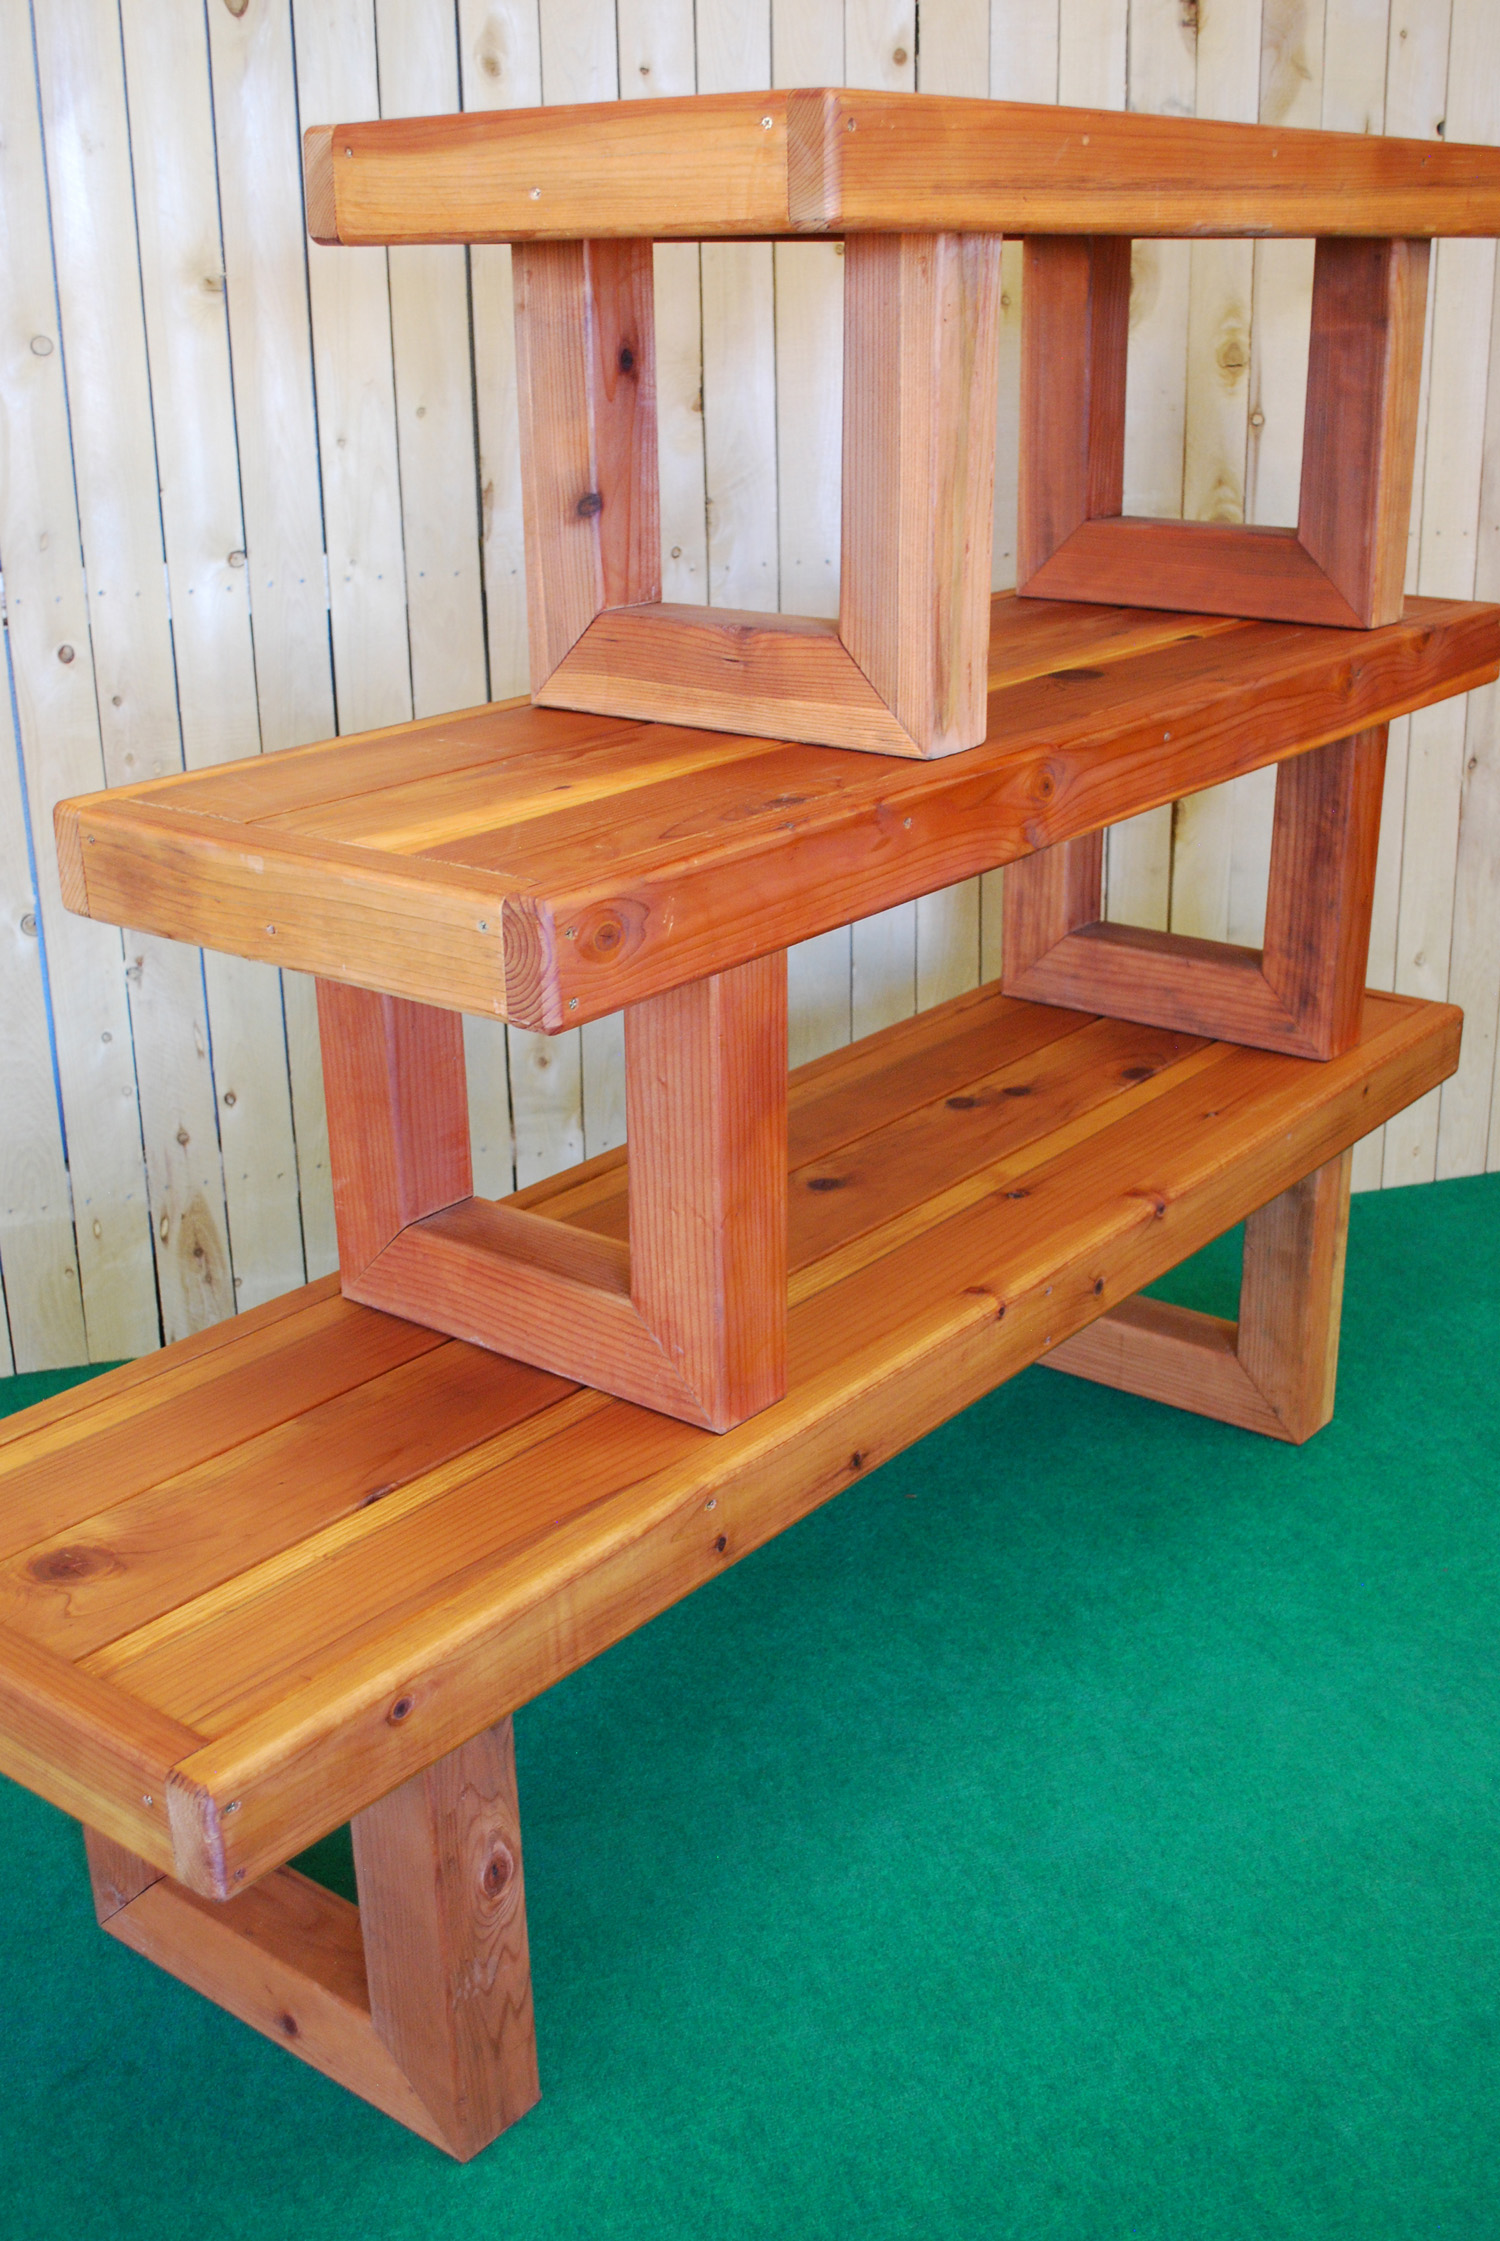 redwood contempo table (all 3 sizes)